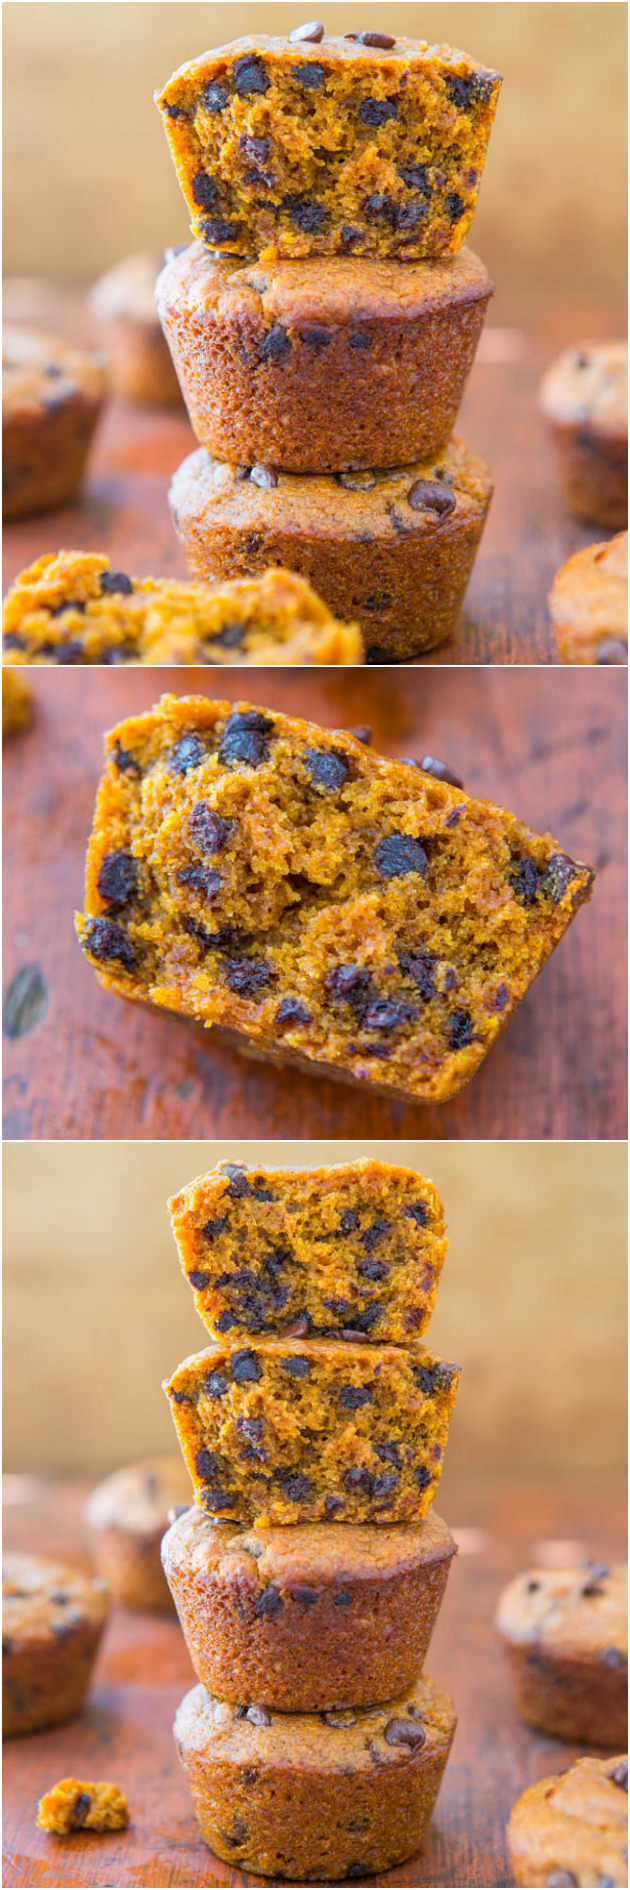 Vegan Chocolate Chip Pumpkin Muffins - You'll never miss the eggs or butter! Easy, soft, fluffy and the best pumpkin muffins ever!